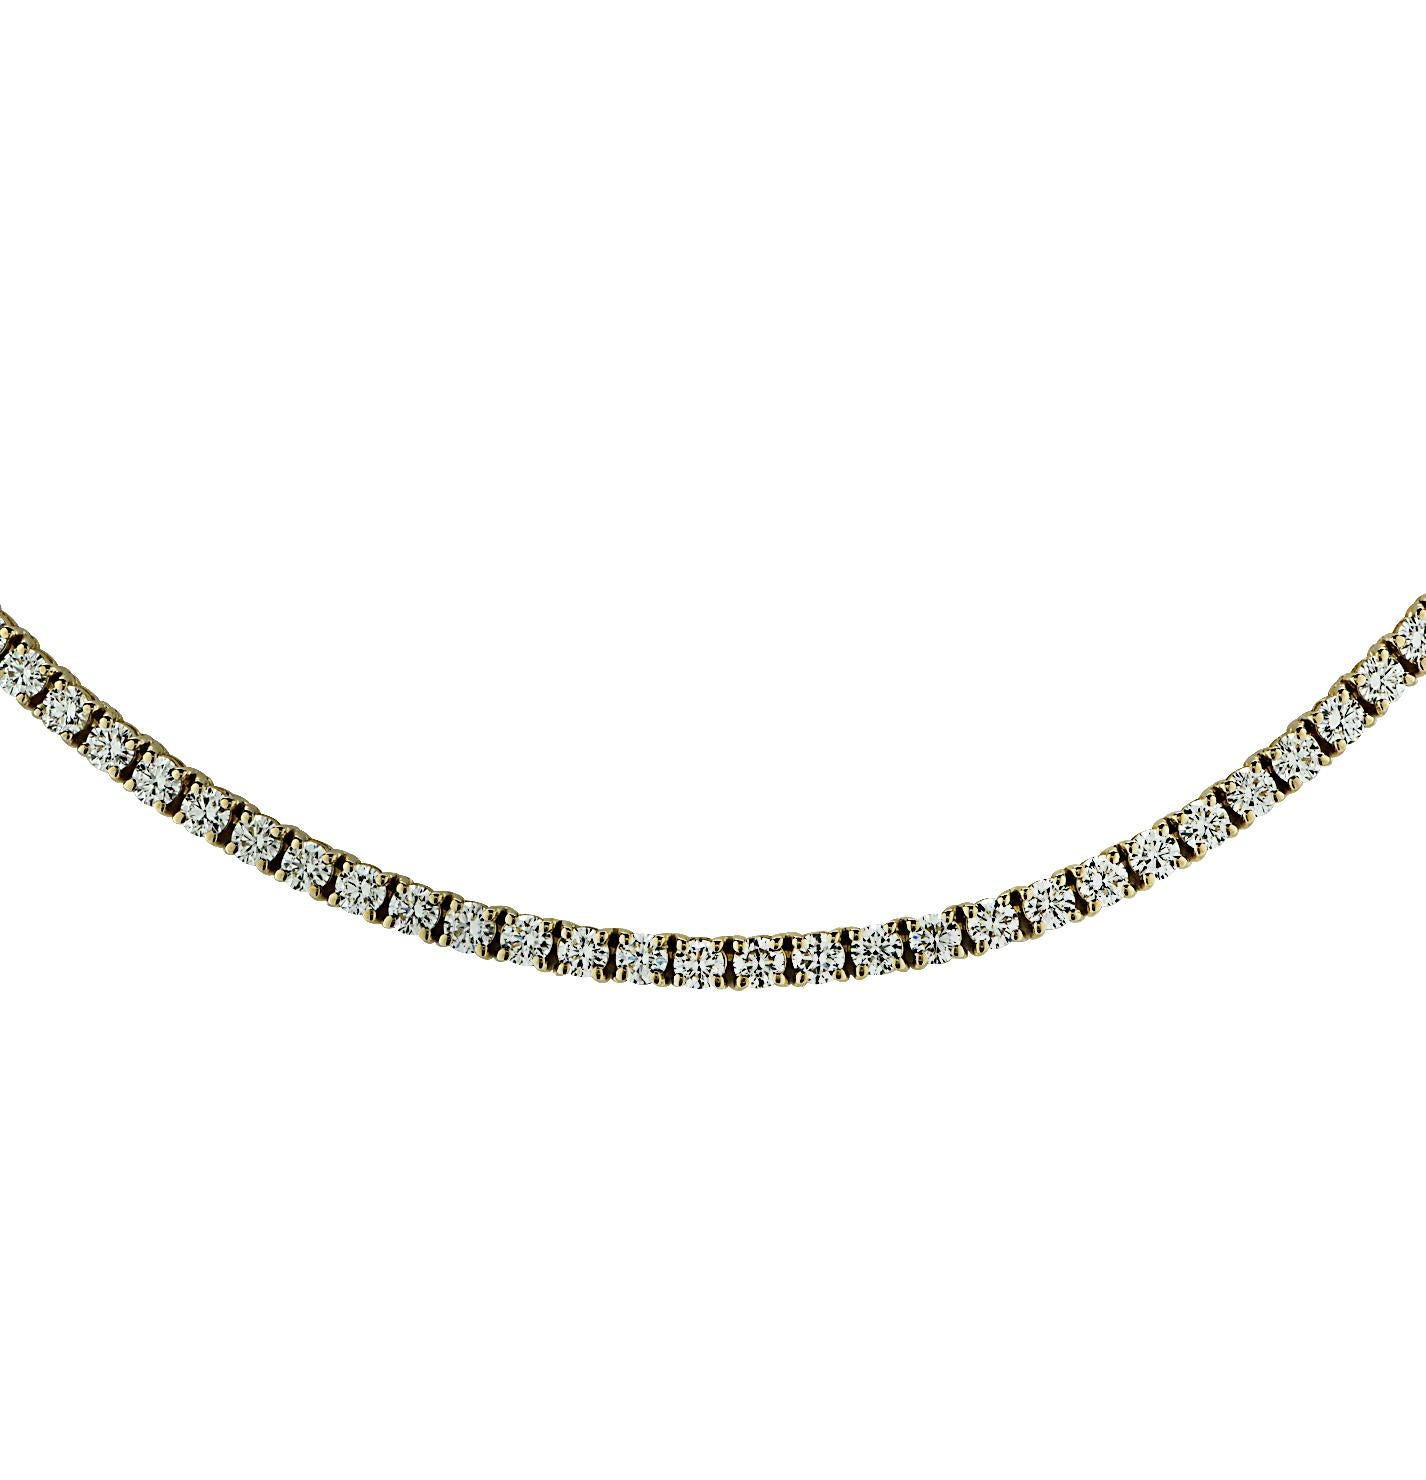 Exquisite Vivid Diamonds Straight Line diamond tennis necklace crafted in 18 Karat Yellow Gold, showcasing 191 round brilliant cut diamonds weighing approximately 3.59 carats total, F color, VS Clarity. Each diamond was carefully selected, perfectly